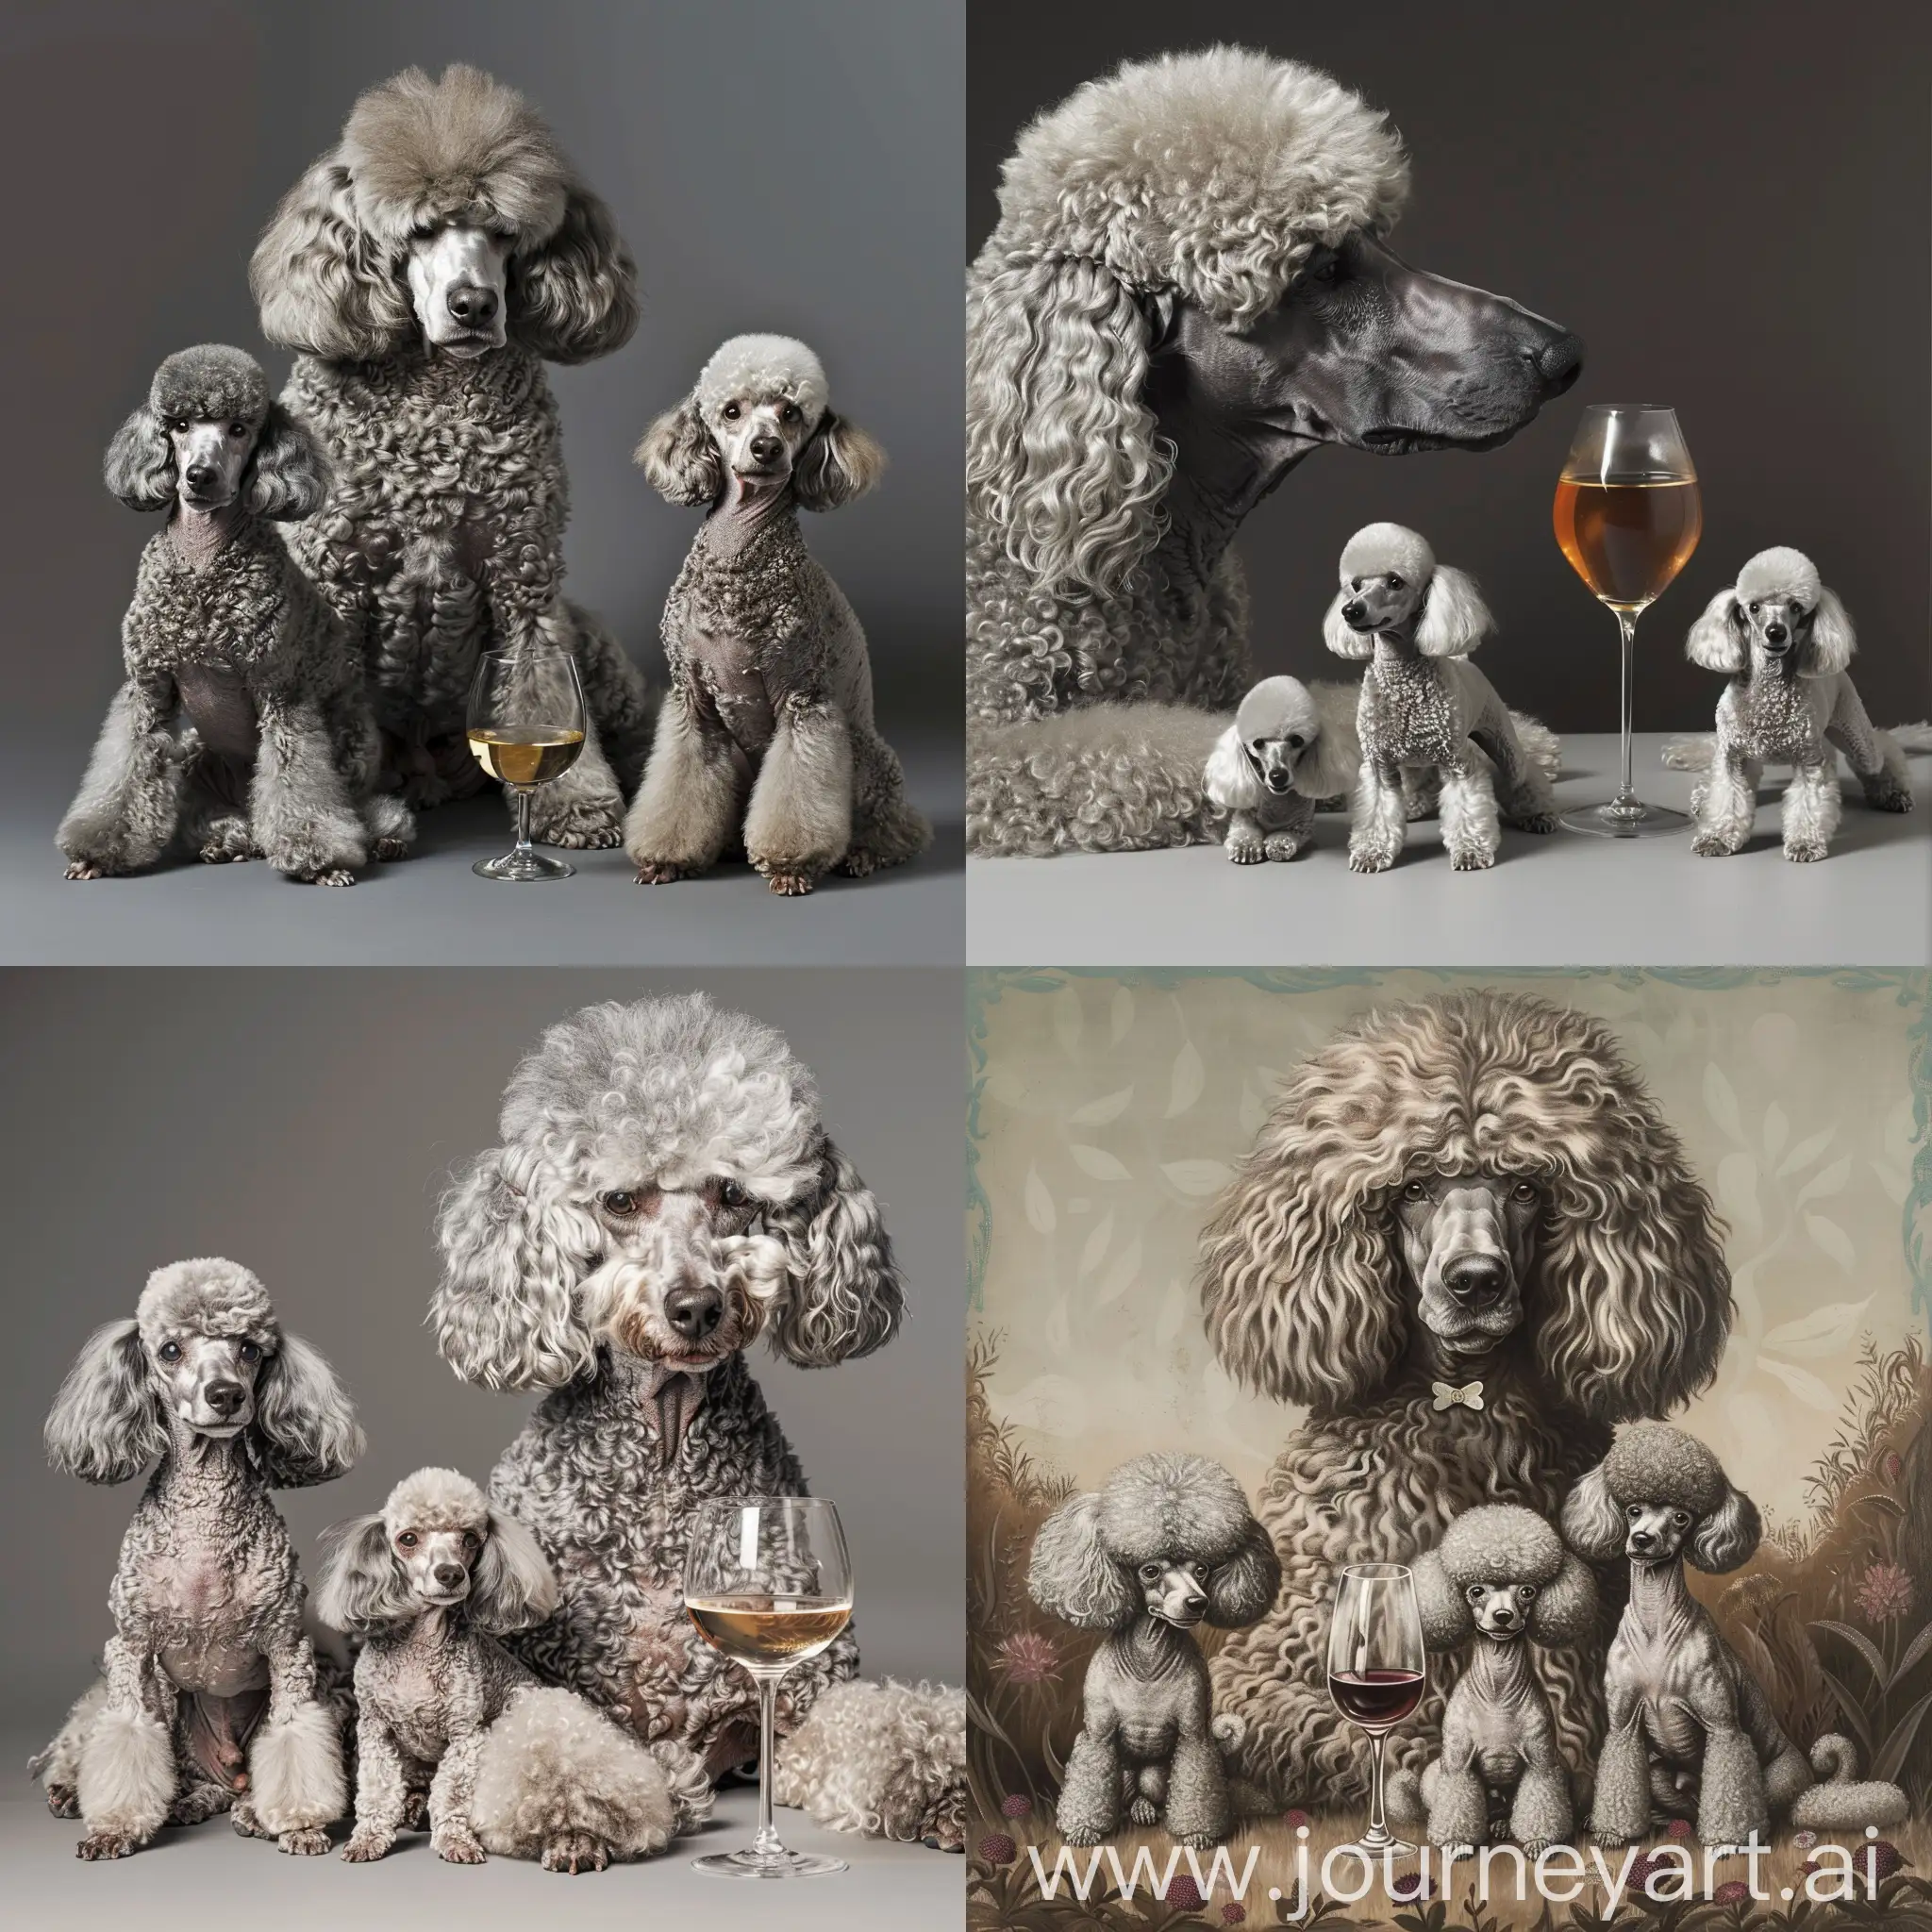 Playful-Miniature-and-Big-Silver-Poodles-with-Wine-Glass